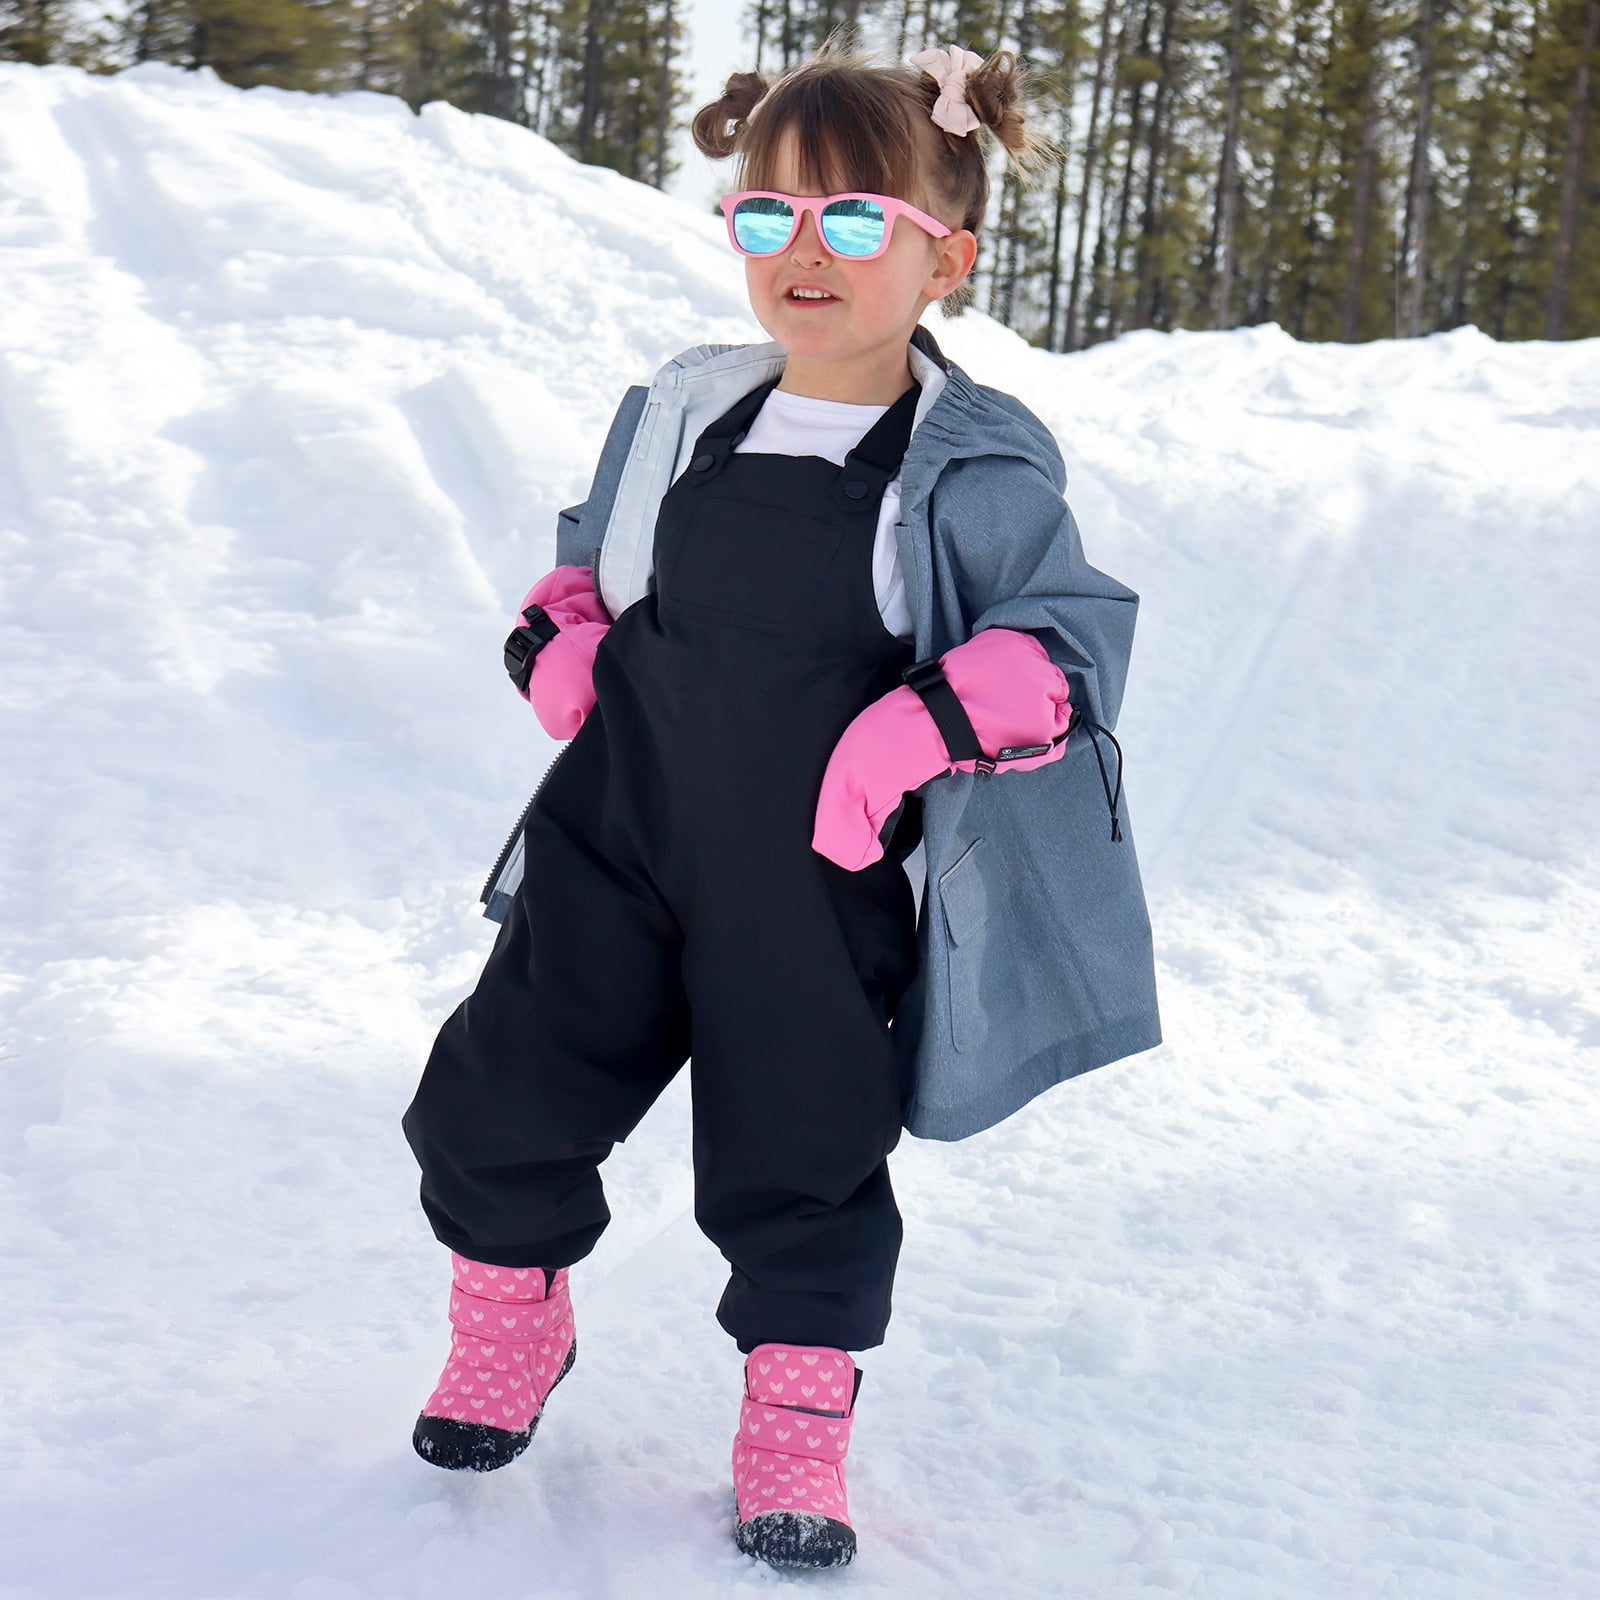 Isbjorn: Among the Best Ski Clothes for Kids